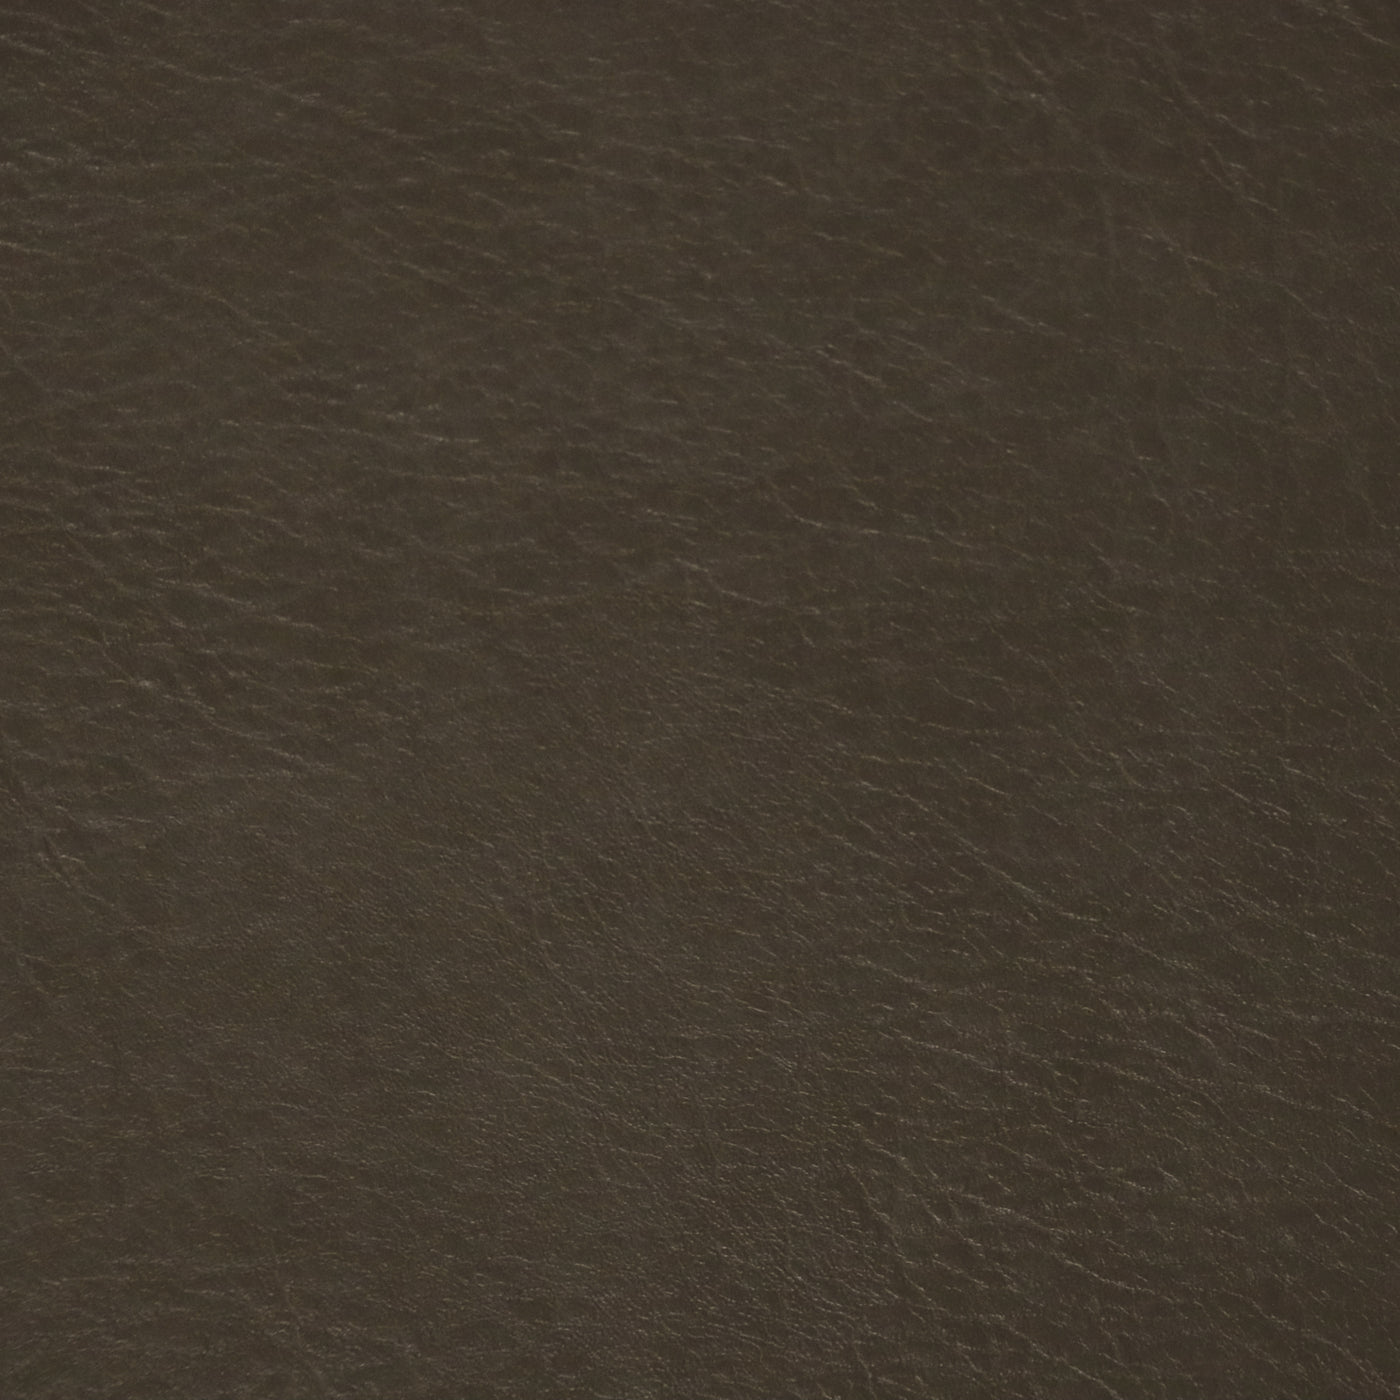 Packaged 1/2 Yard Cut: Charcoal Legacy Faux Leather